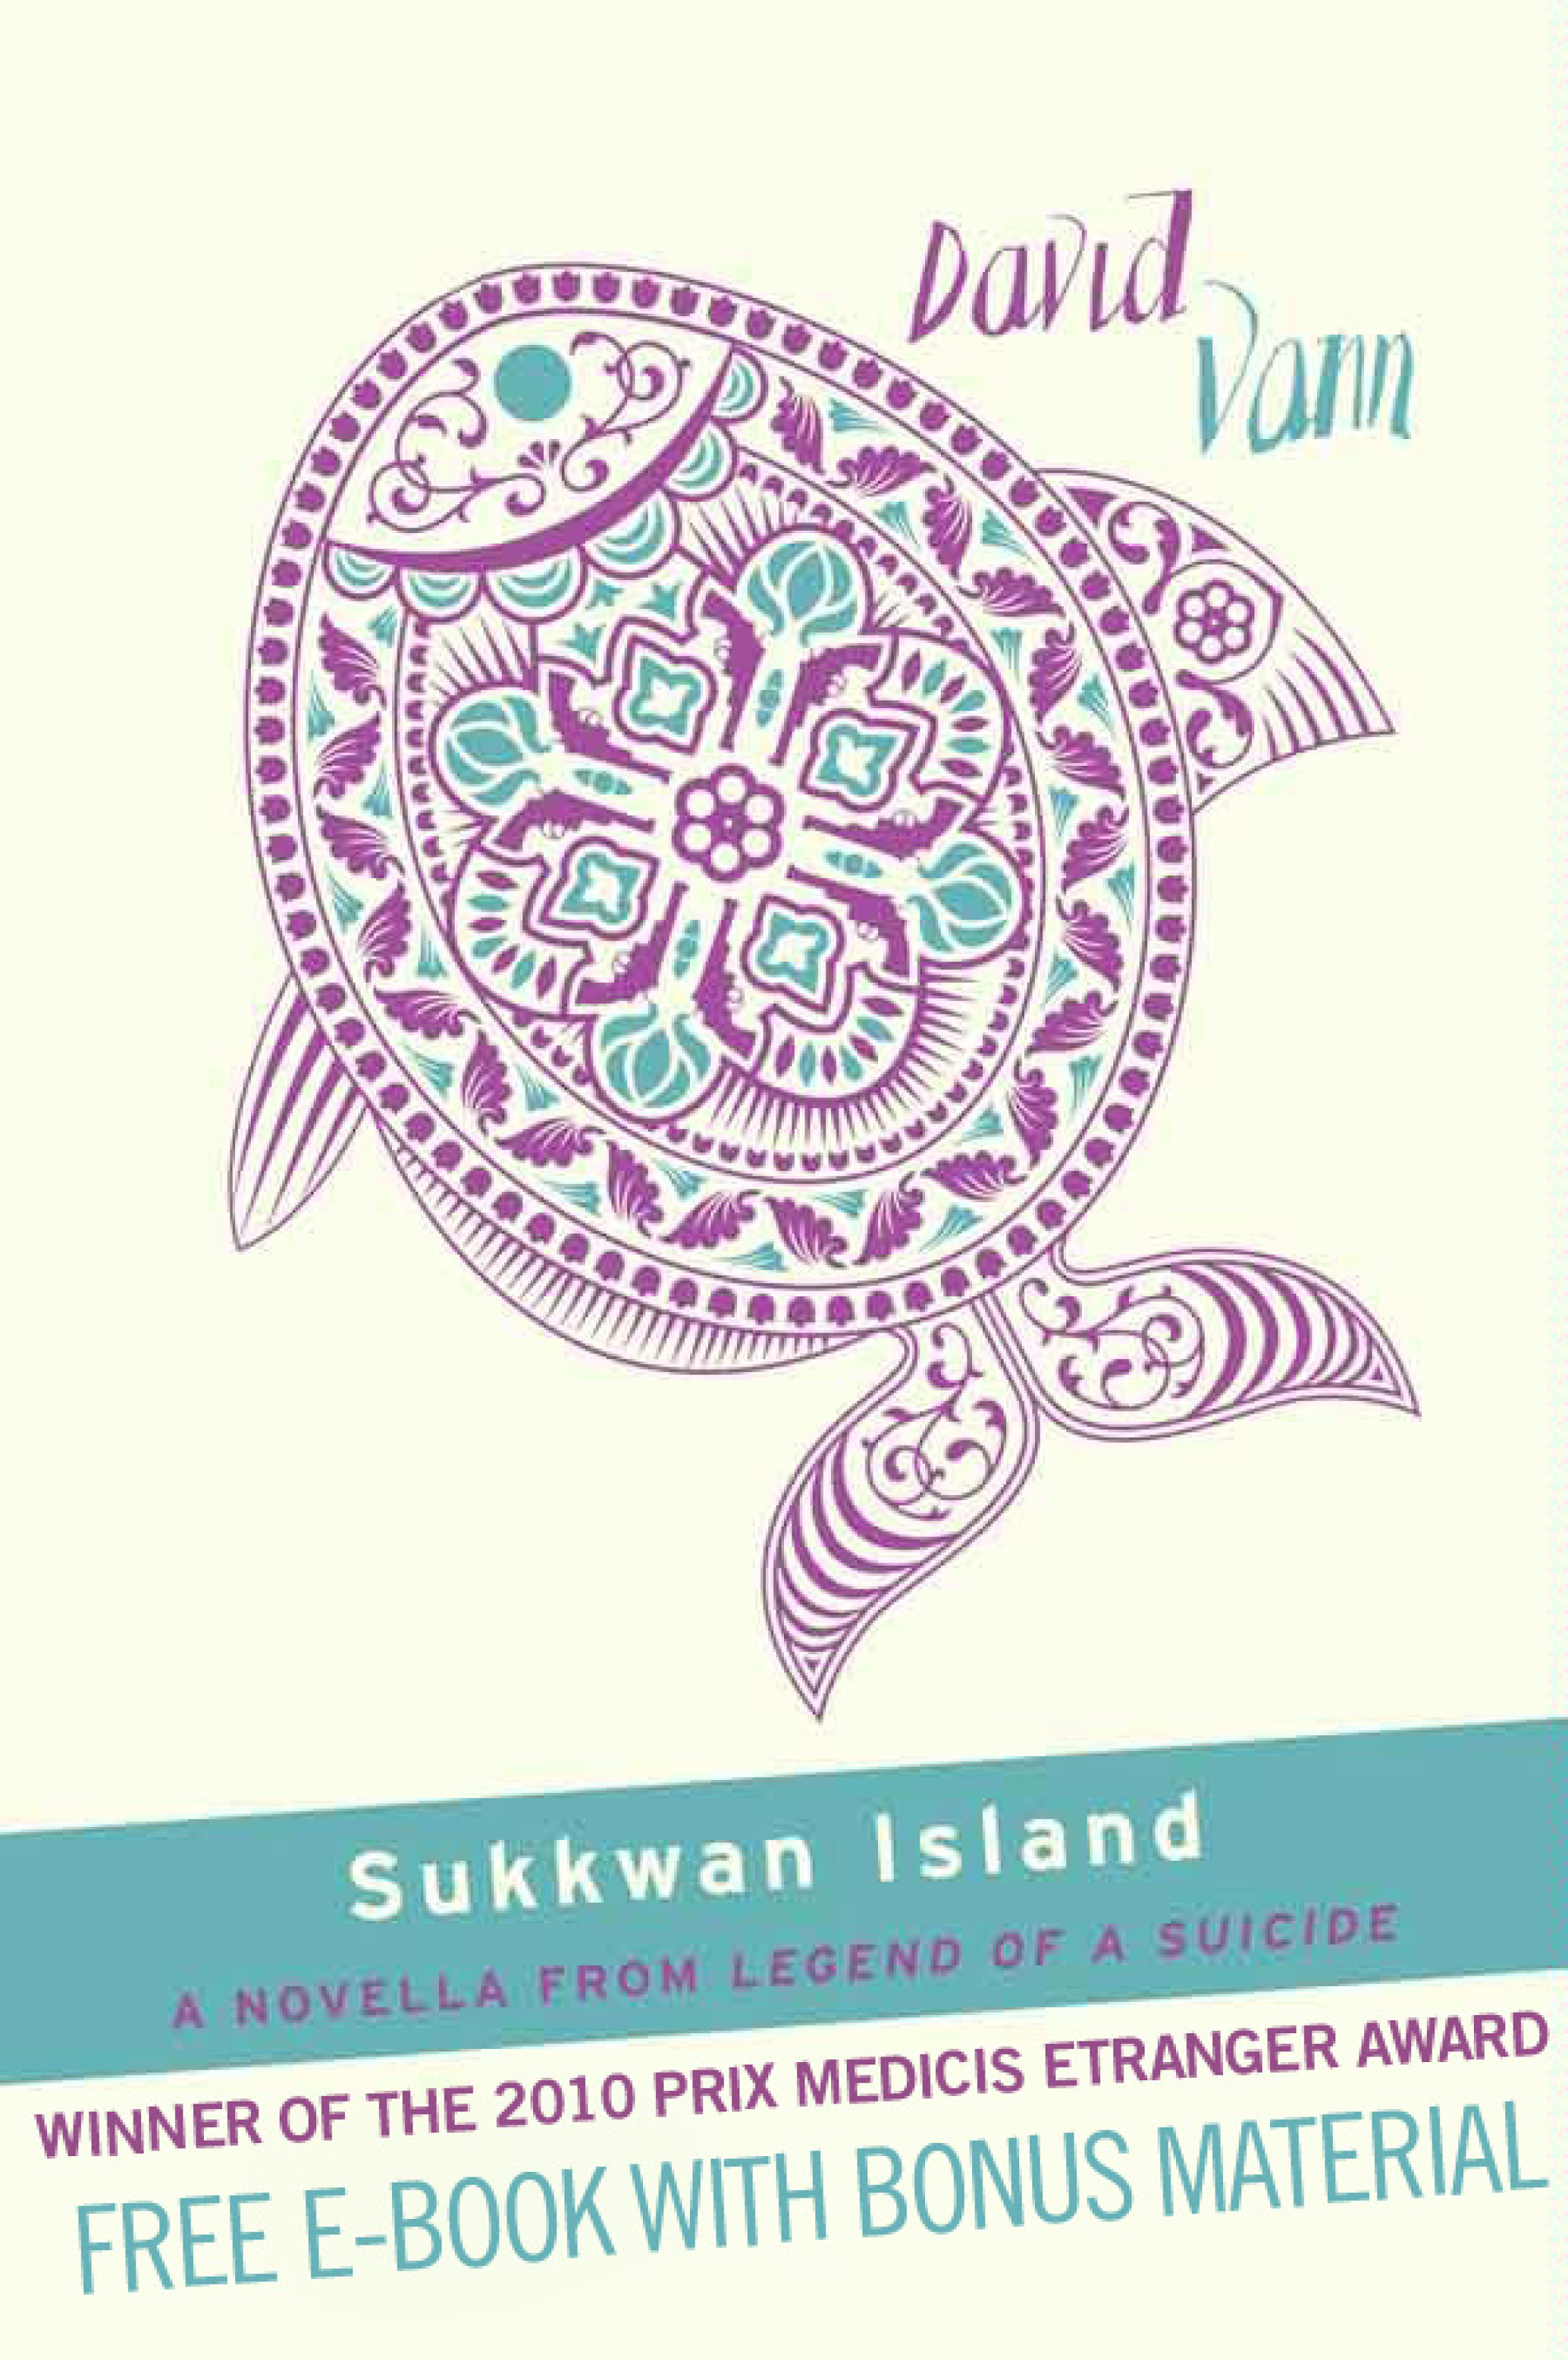 Sukkwan Island: A Novella From Legend of a Suicide